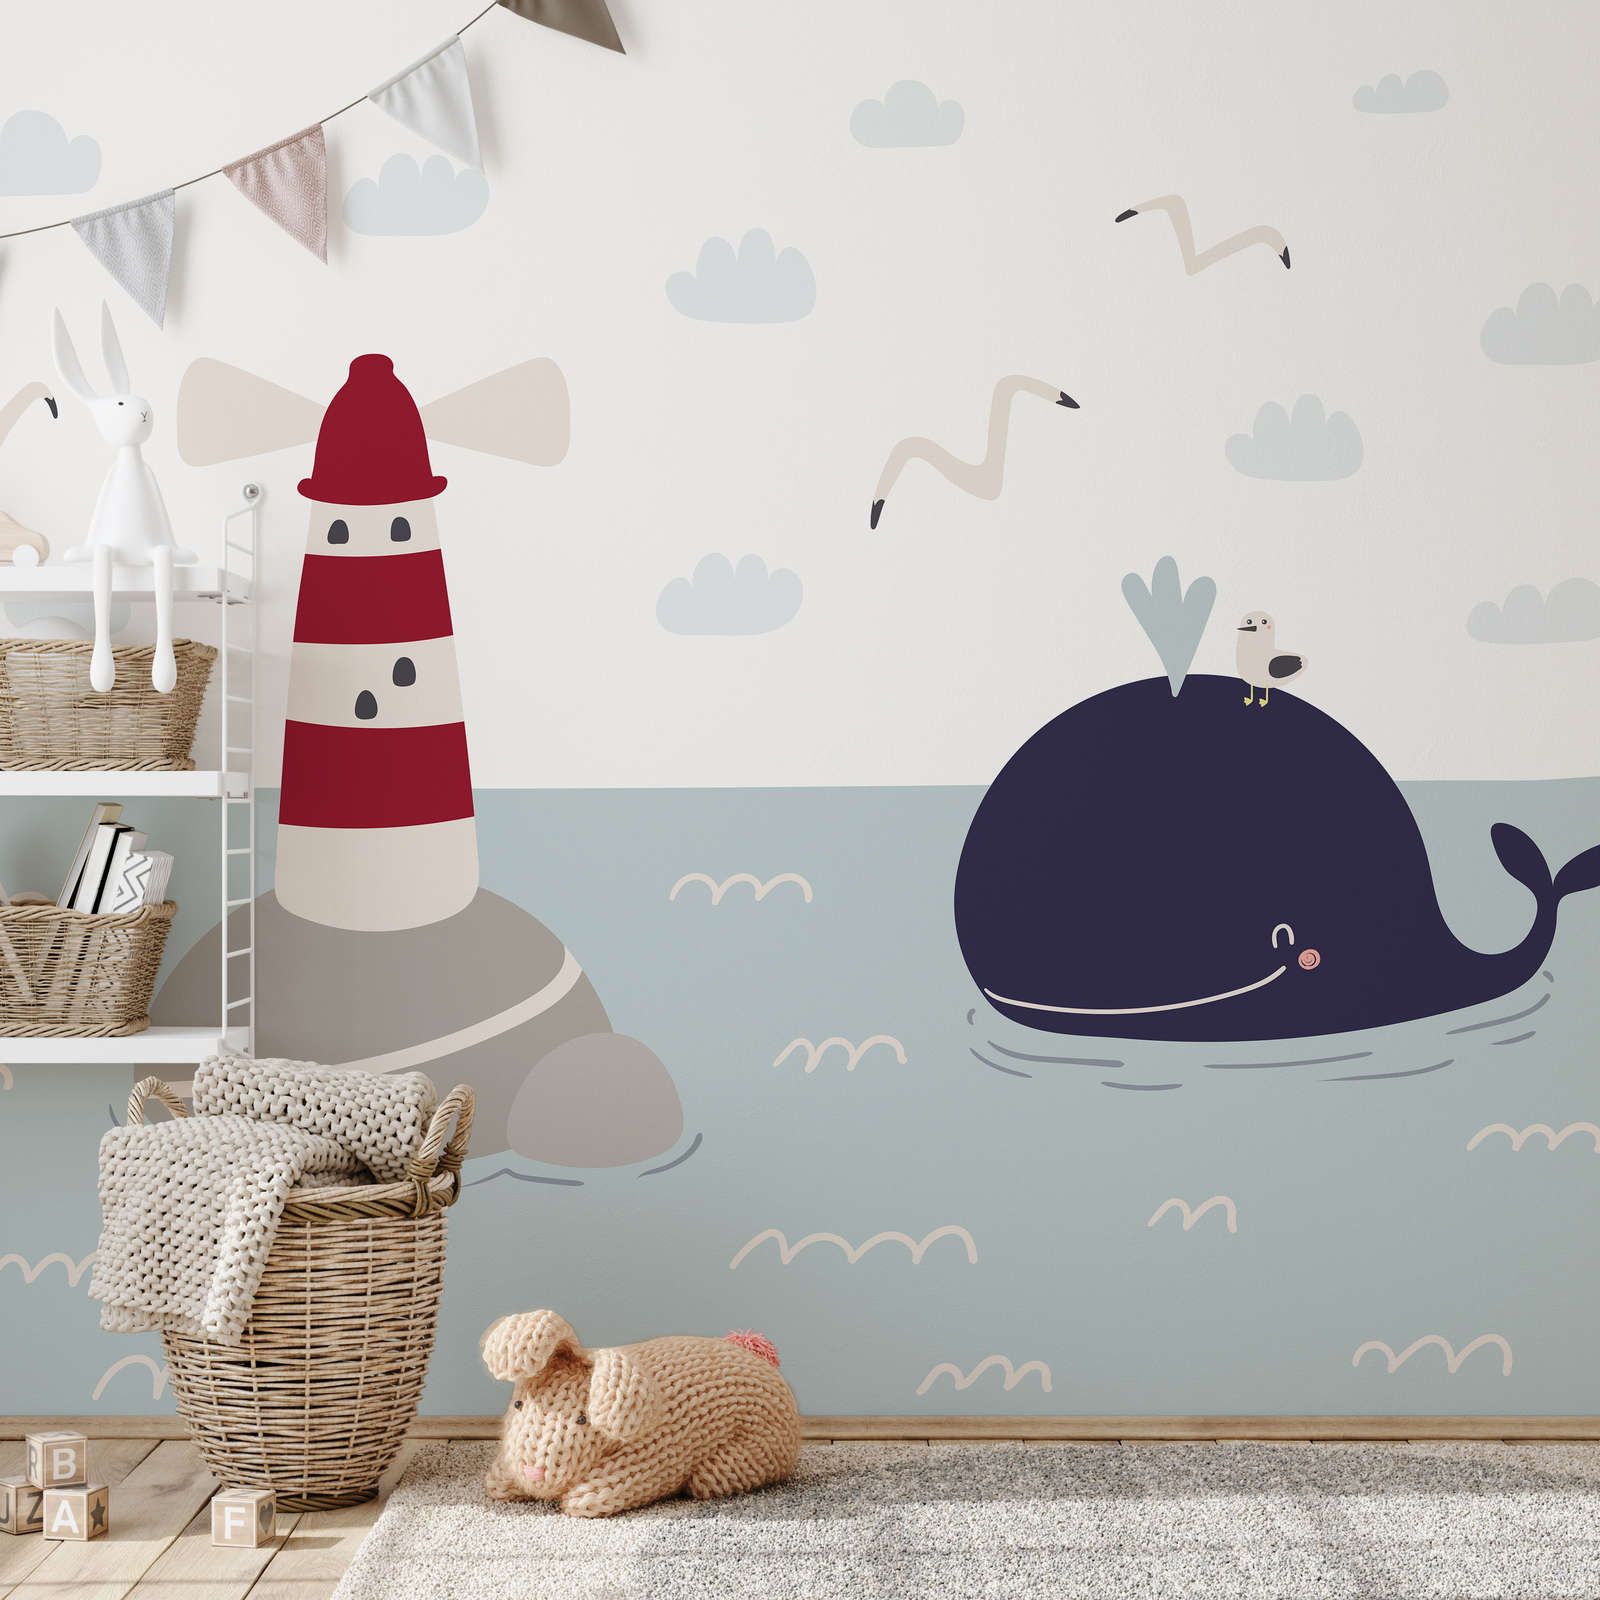             Photo wallpaper for children's room with lighthouse and whale - Smooth & slightly shiny non-woven
        